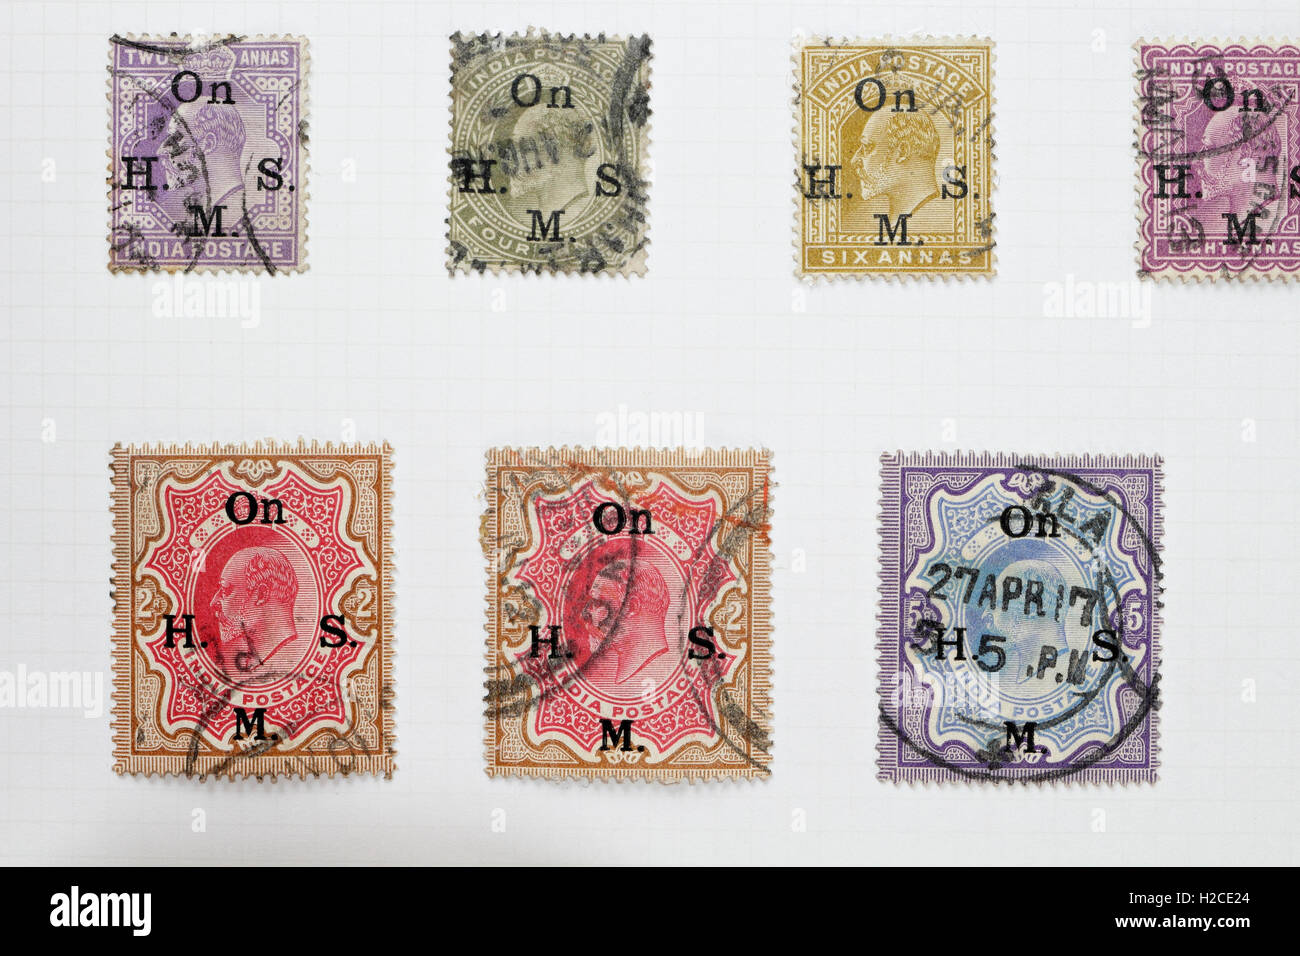 Indian King Edward VII India British Empire Postage Stamps, stamp collecting hobby On his majesty's service Stock Photo